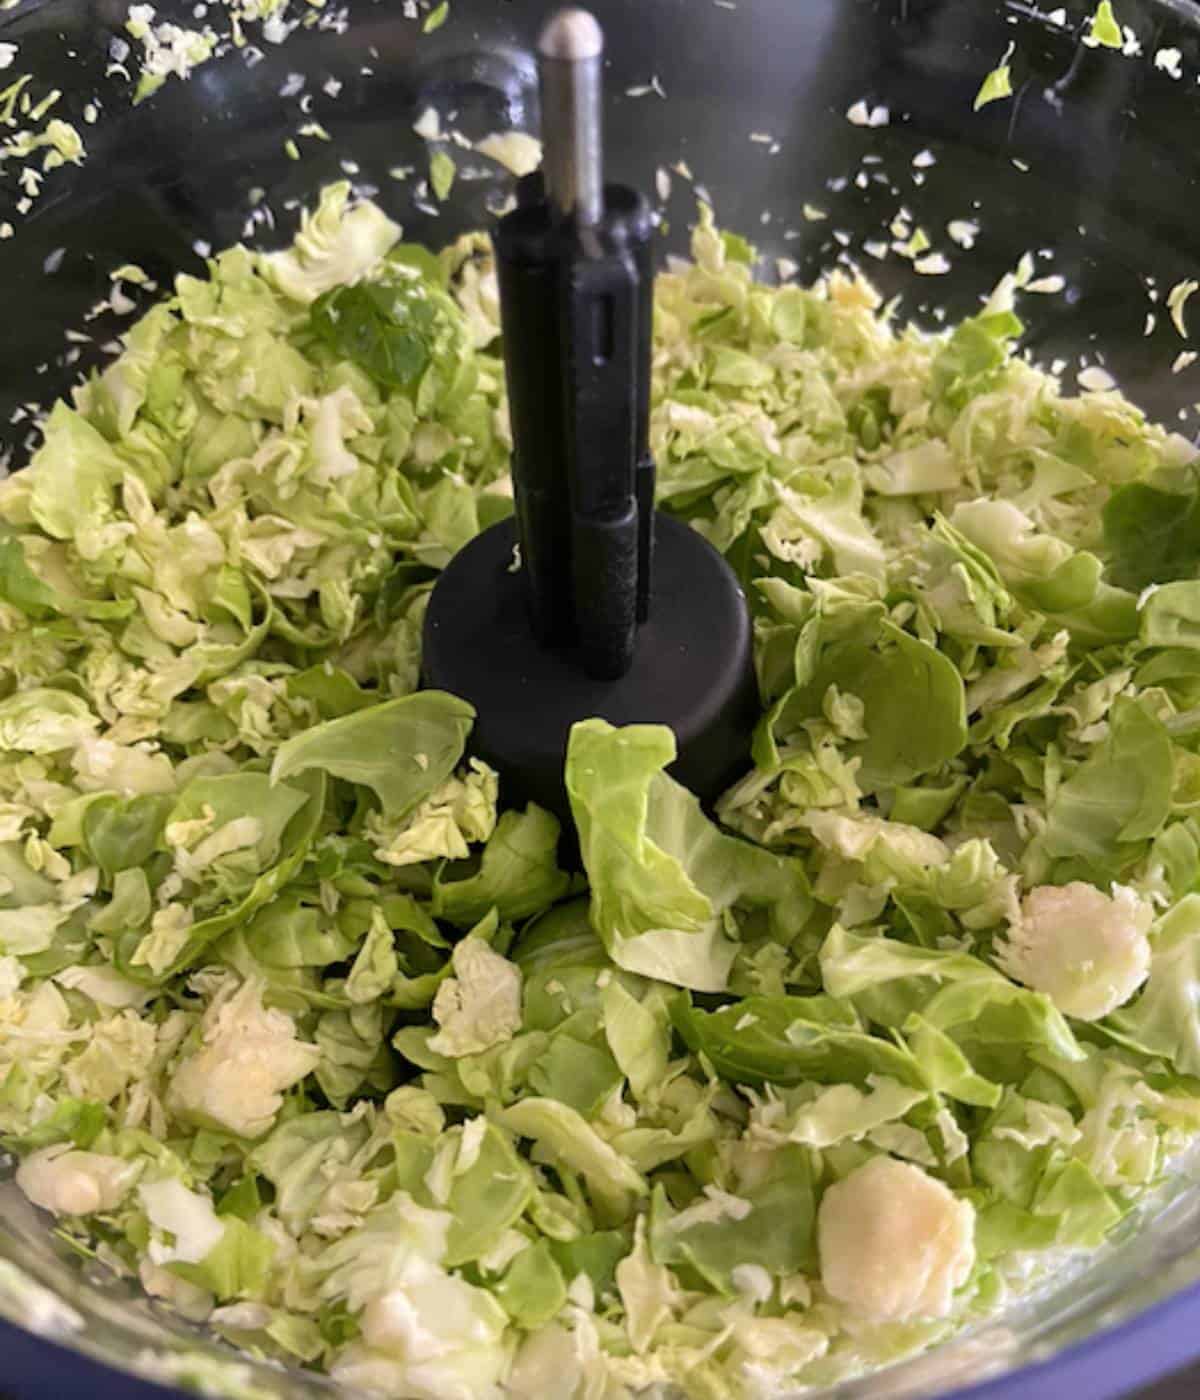 Shaved brussel sprouts in food processor.